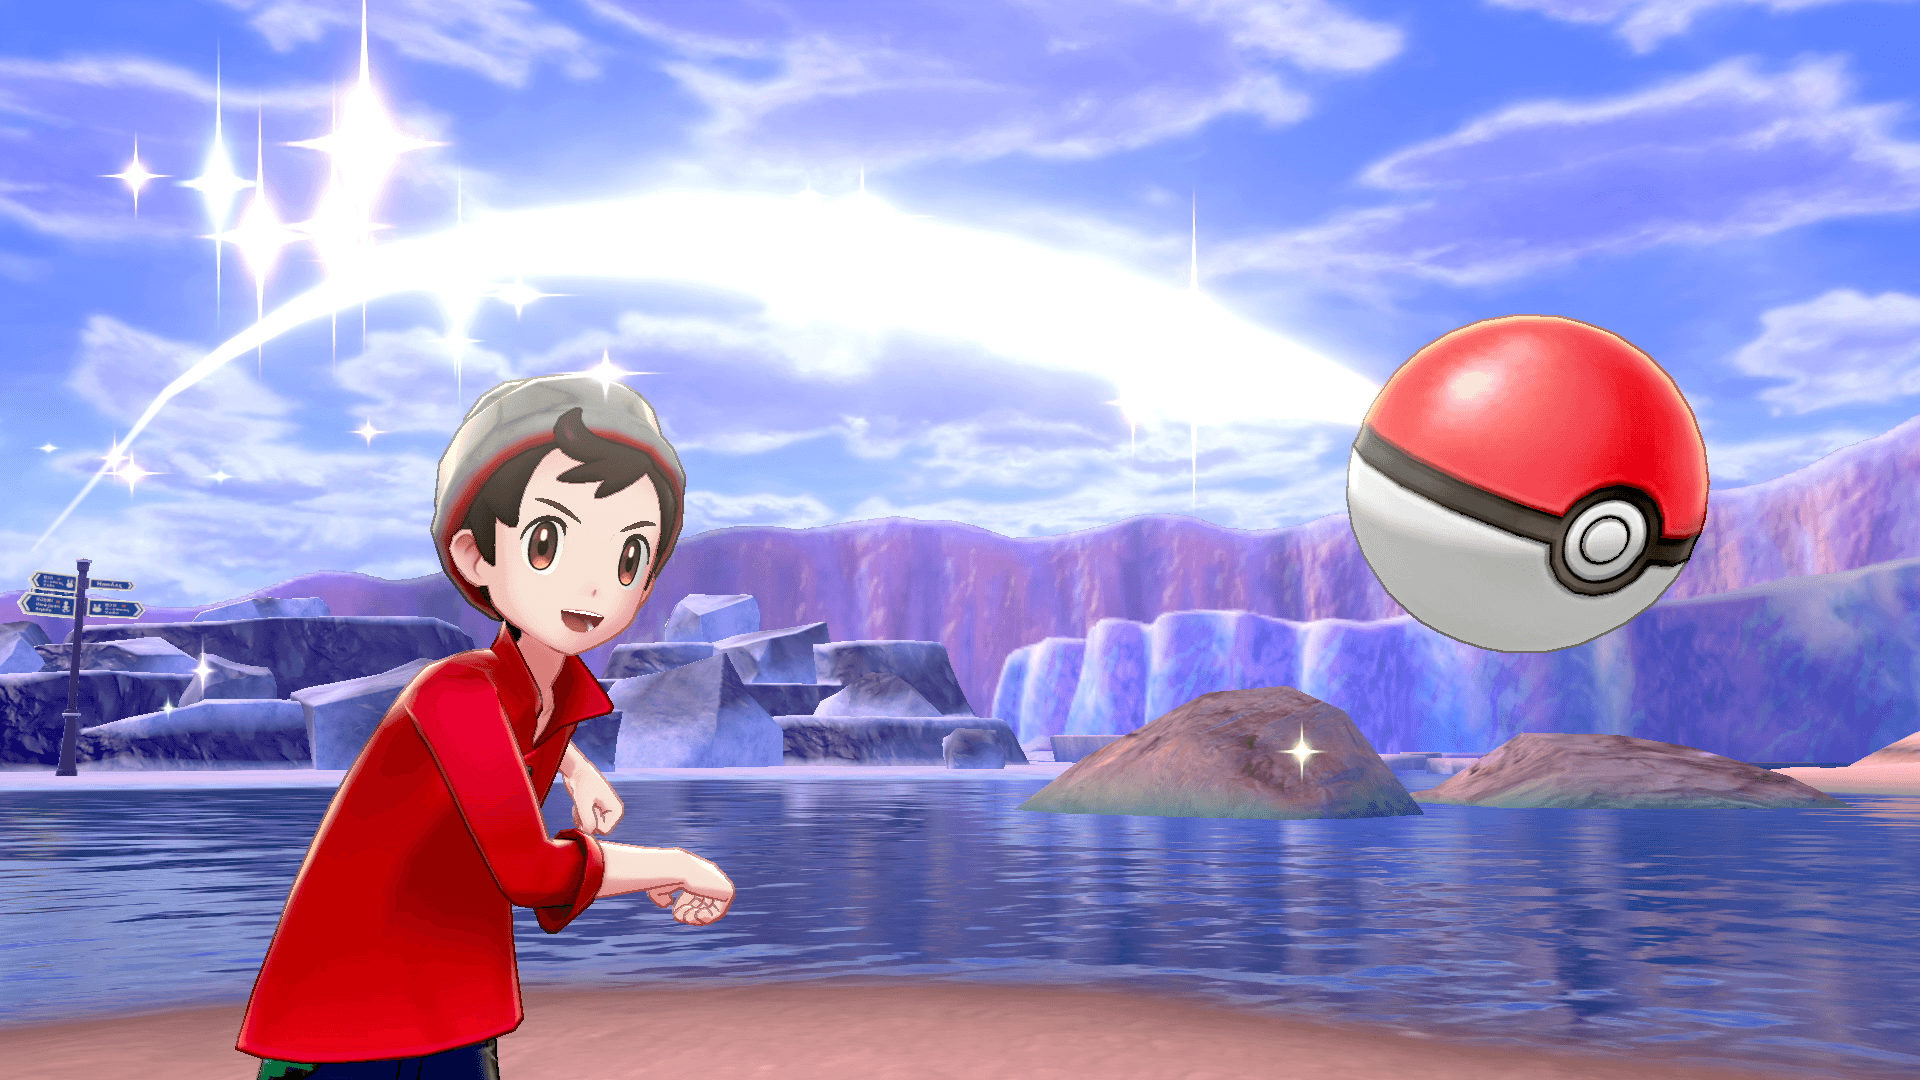 Pokemon Sword and Shield' Announced For Nintendo Switch